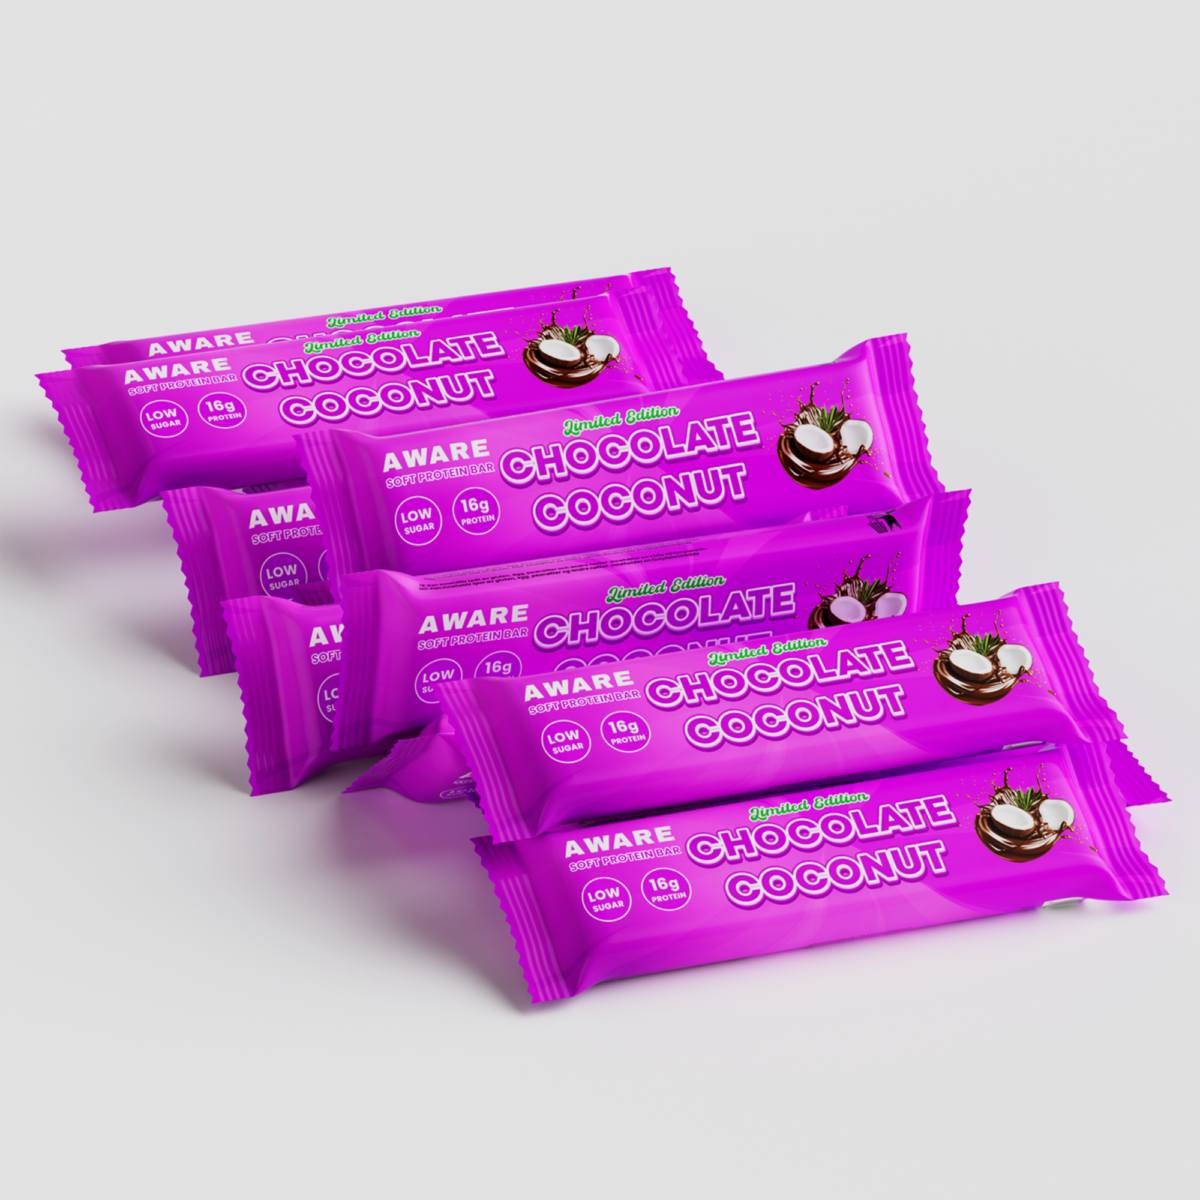 AWARE Protein Bar Chocolate Coconut 12 pack